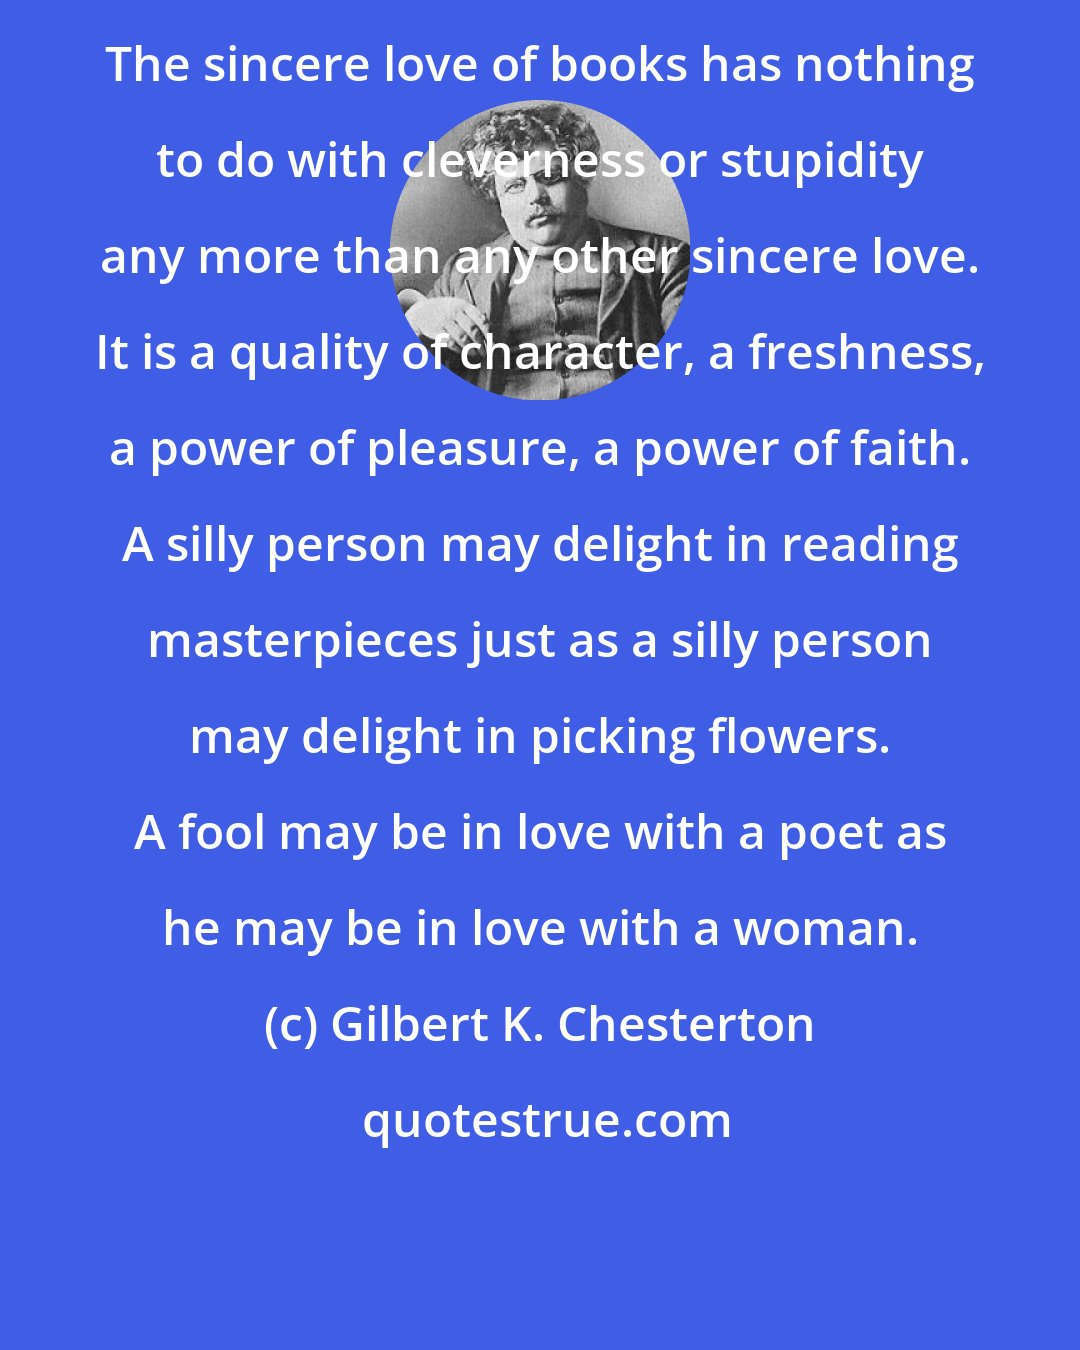 Gilbert K. Chesterton: The sincere love of books has nothing to do with cleverness or stupidity any more than any other sincere love. It is a quality of character, a freshness, a power of pleasure, a power of faith. A silly person may delight in reading masterpieces just as a silly person may delight in picking flowers. A fool may be in love with a poet as he may be in love with a woman.